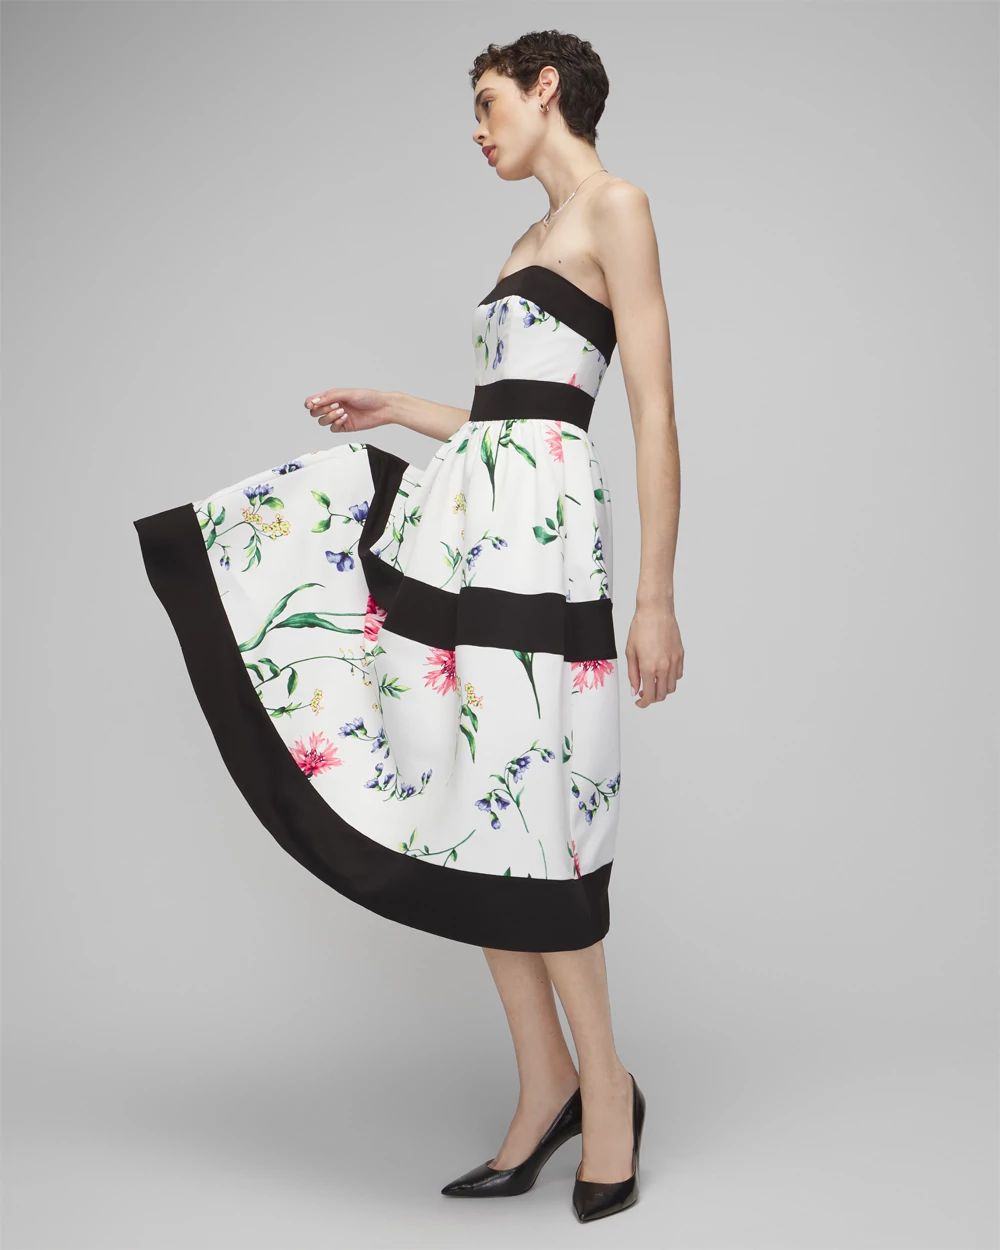 Strapless Floral Contrast Fit & Flare Dress click to view larger image.